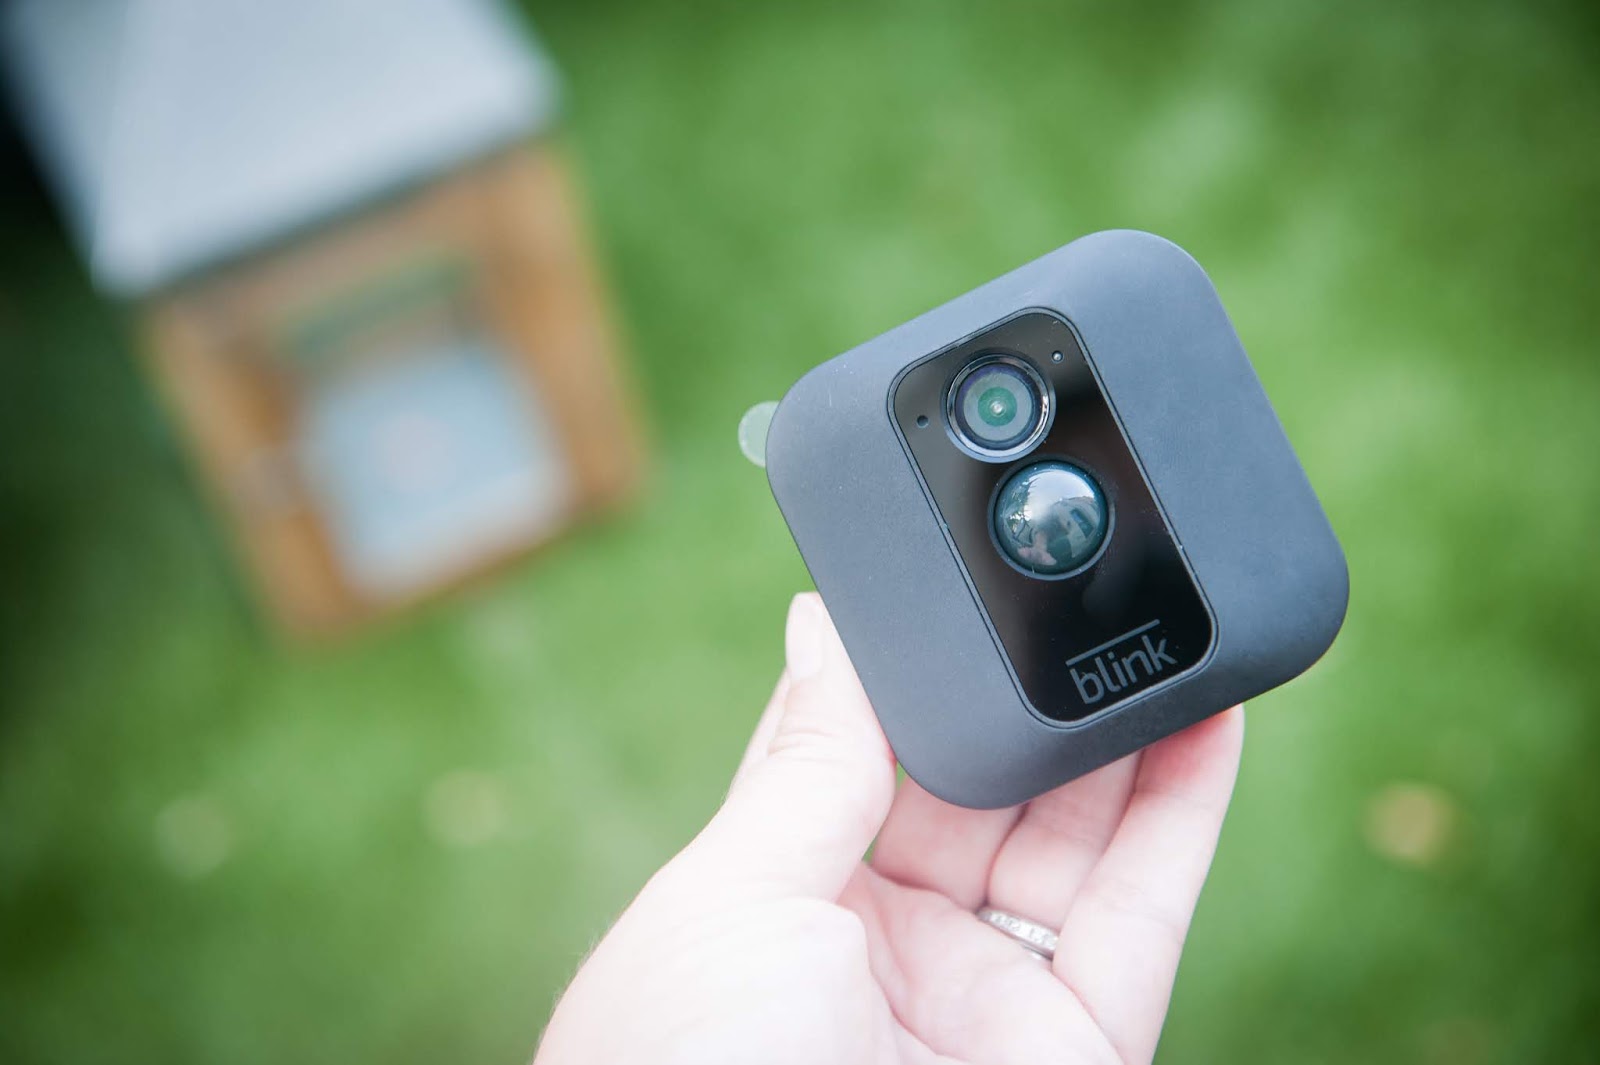 How to Install & Set Up a Blink Video Camera